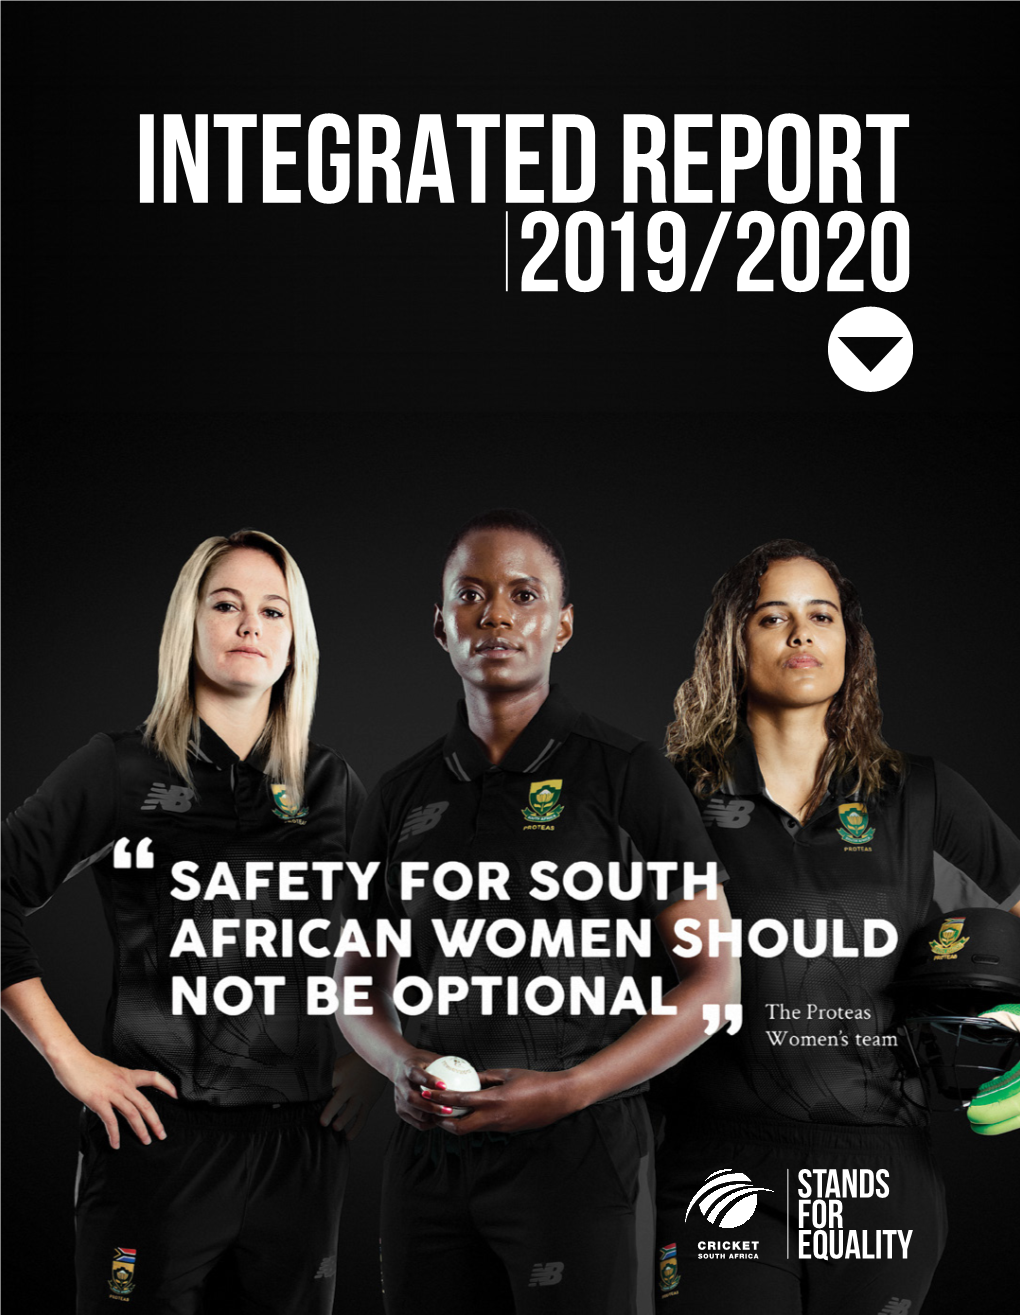 2019/20 Annual Integrated Report